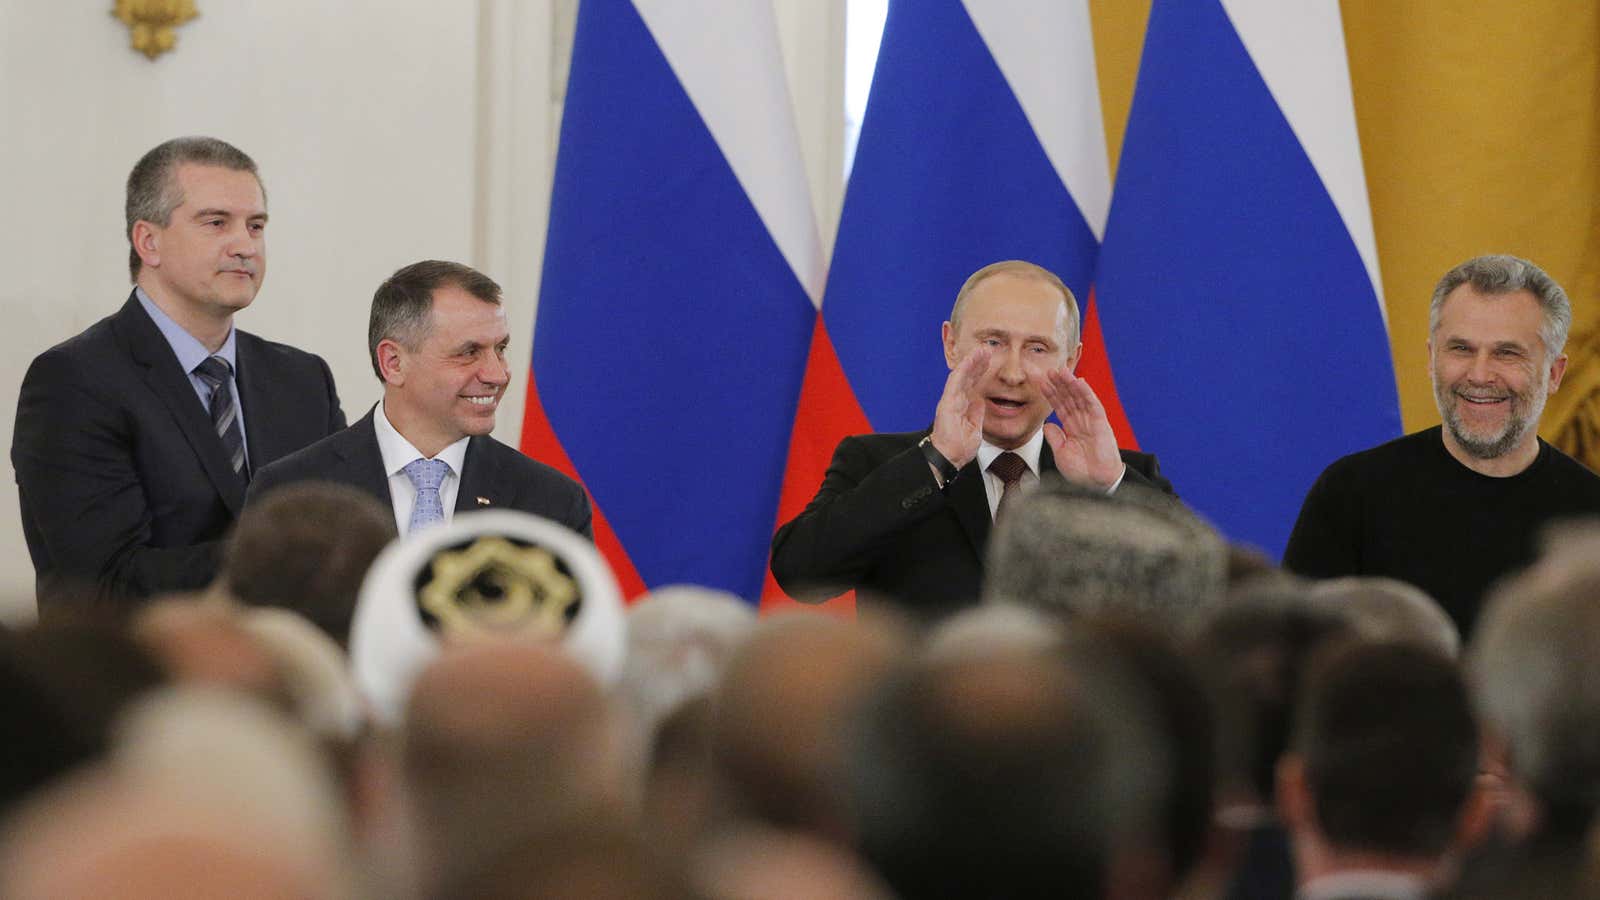 Memo to S&amp;P: Putin doesn’t seem to be in much of a mood to listen right now.